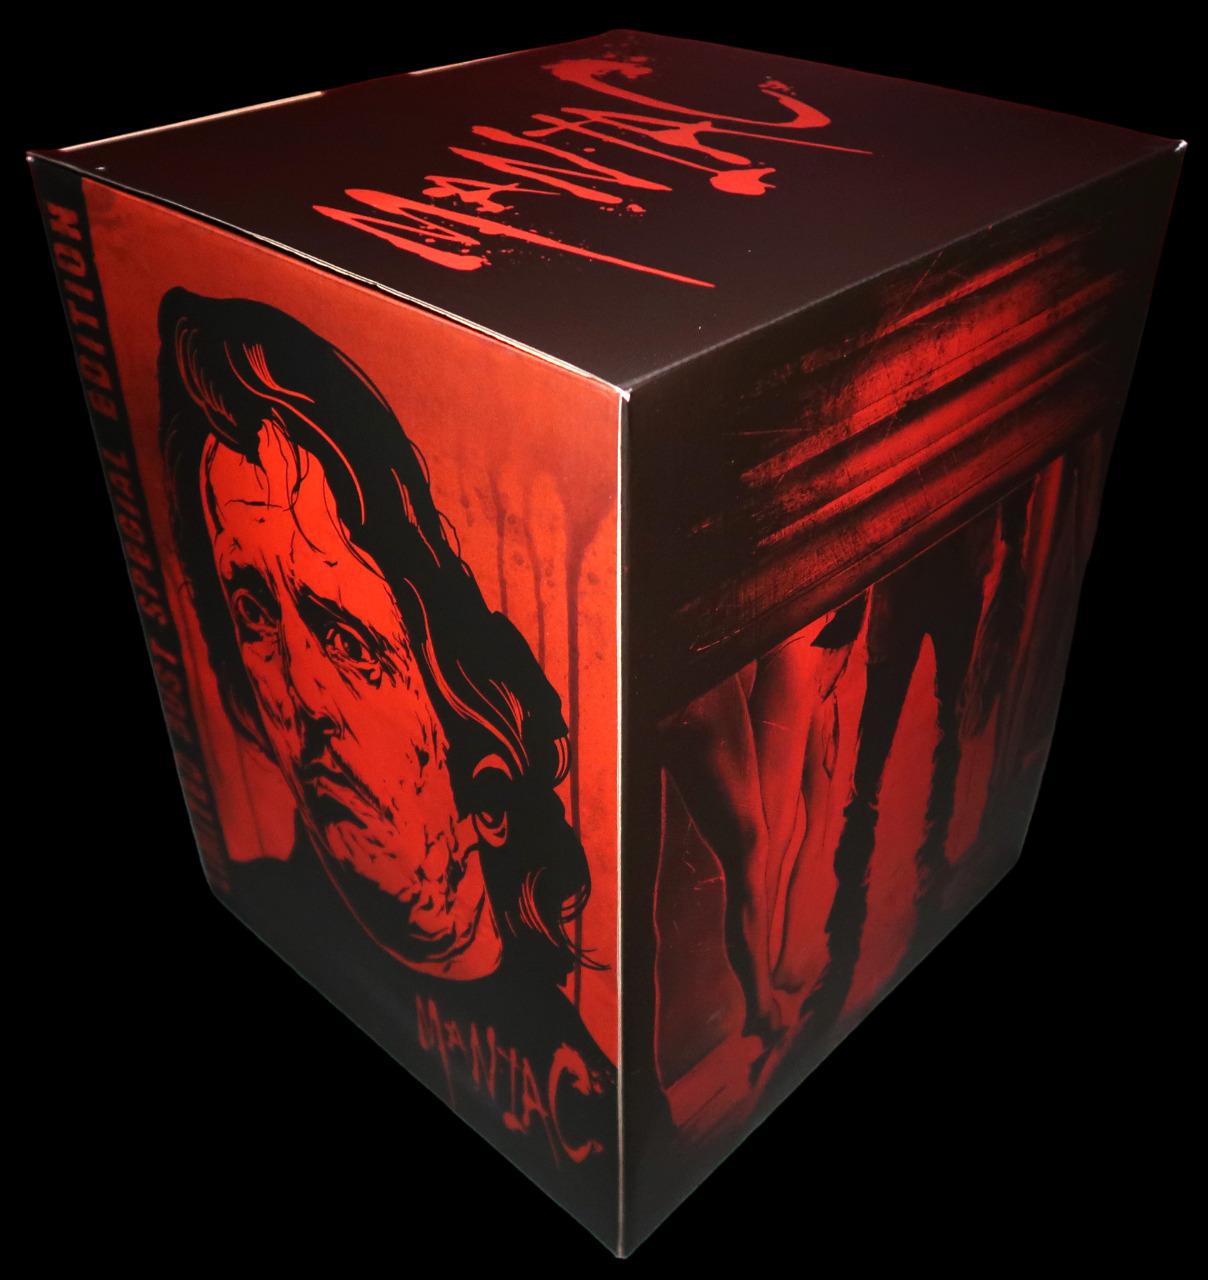 Maniac Limited Bust Special Edition (1980/2012) Nameless Media 12-Discs and More